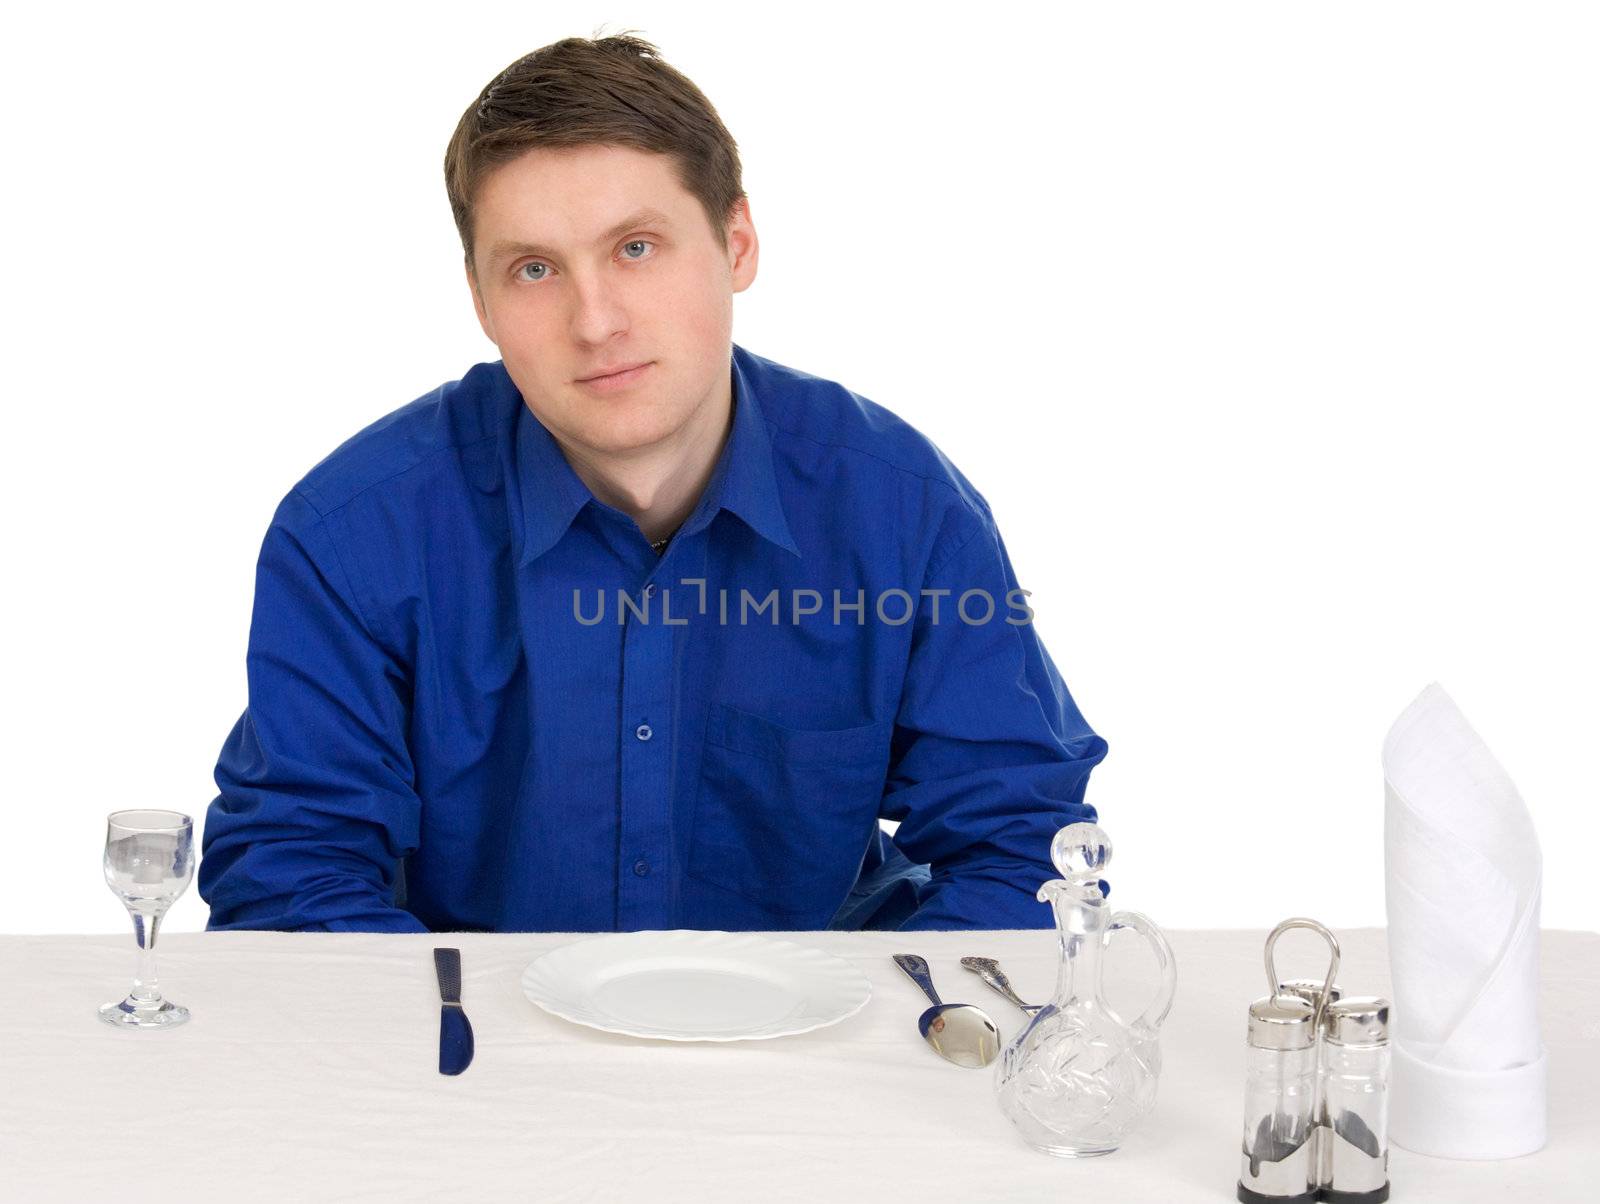 Guest of restaurant in blue shirt on a white background